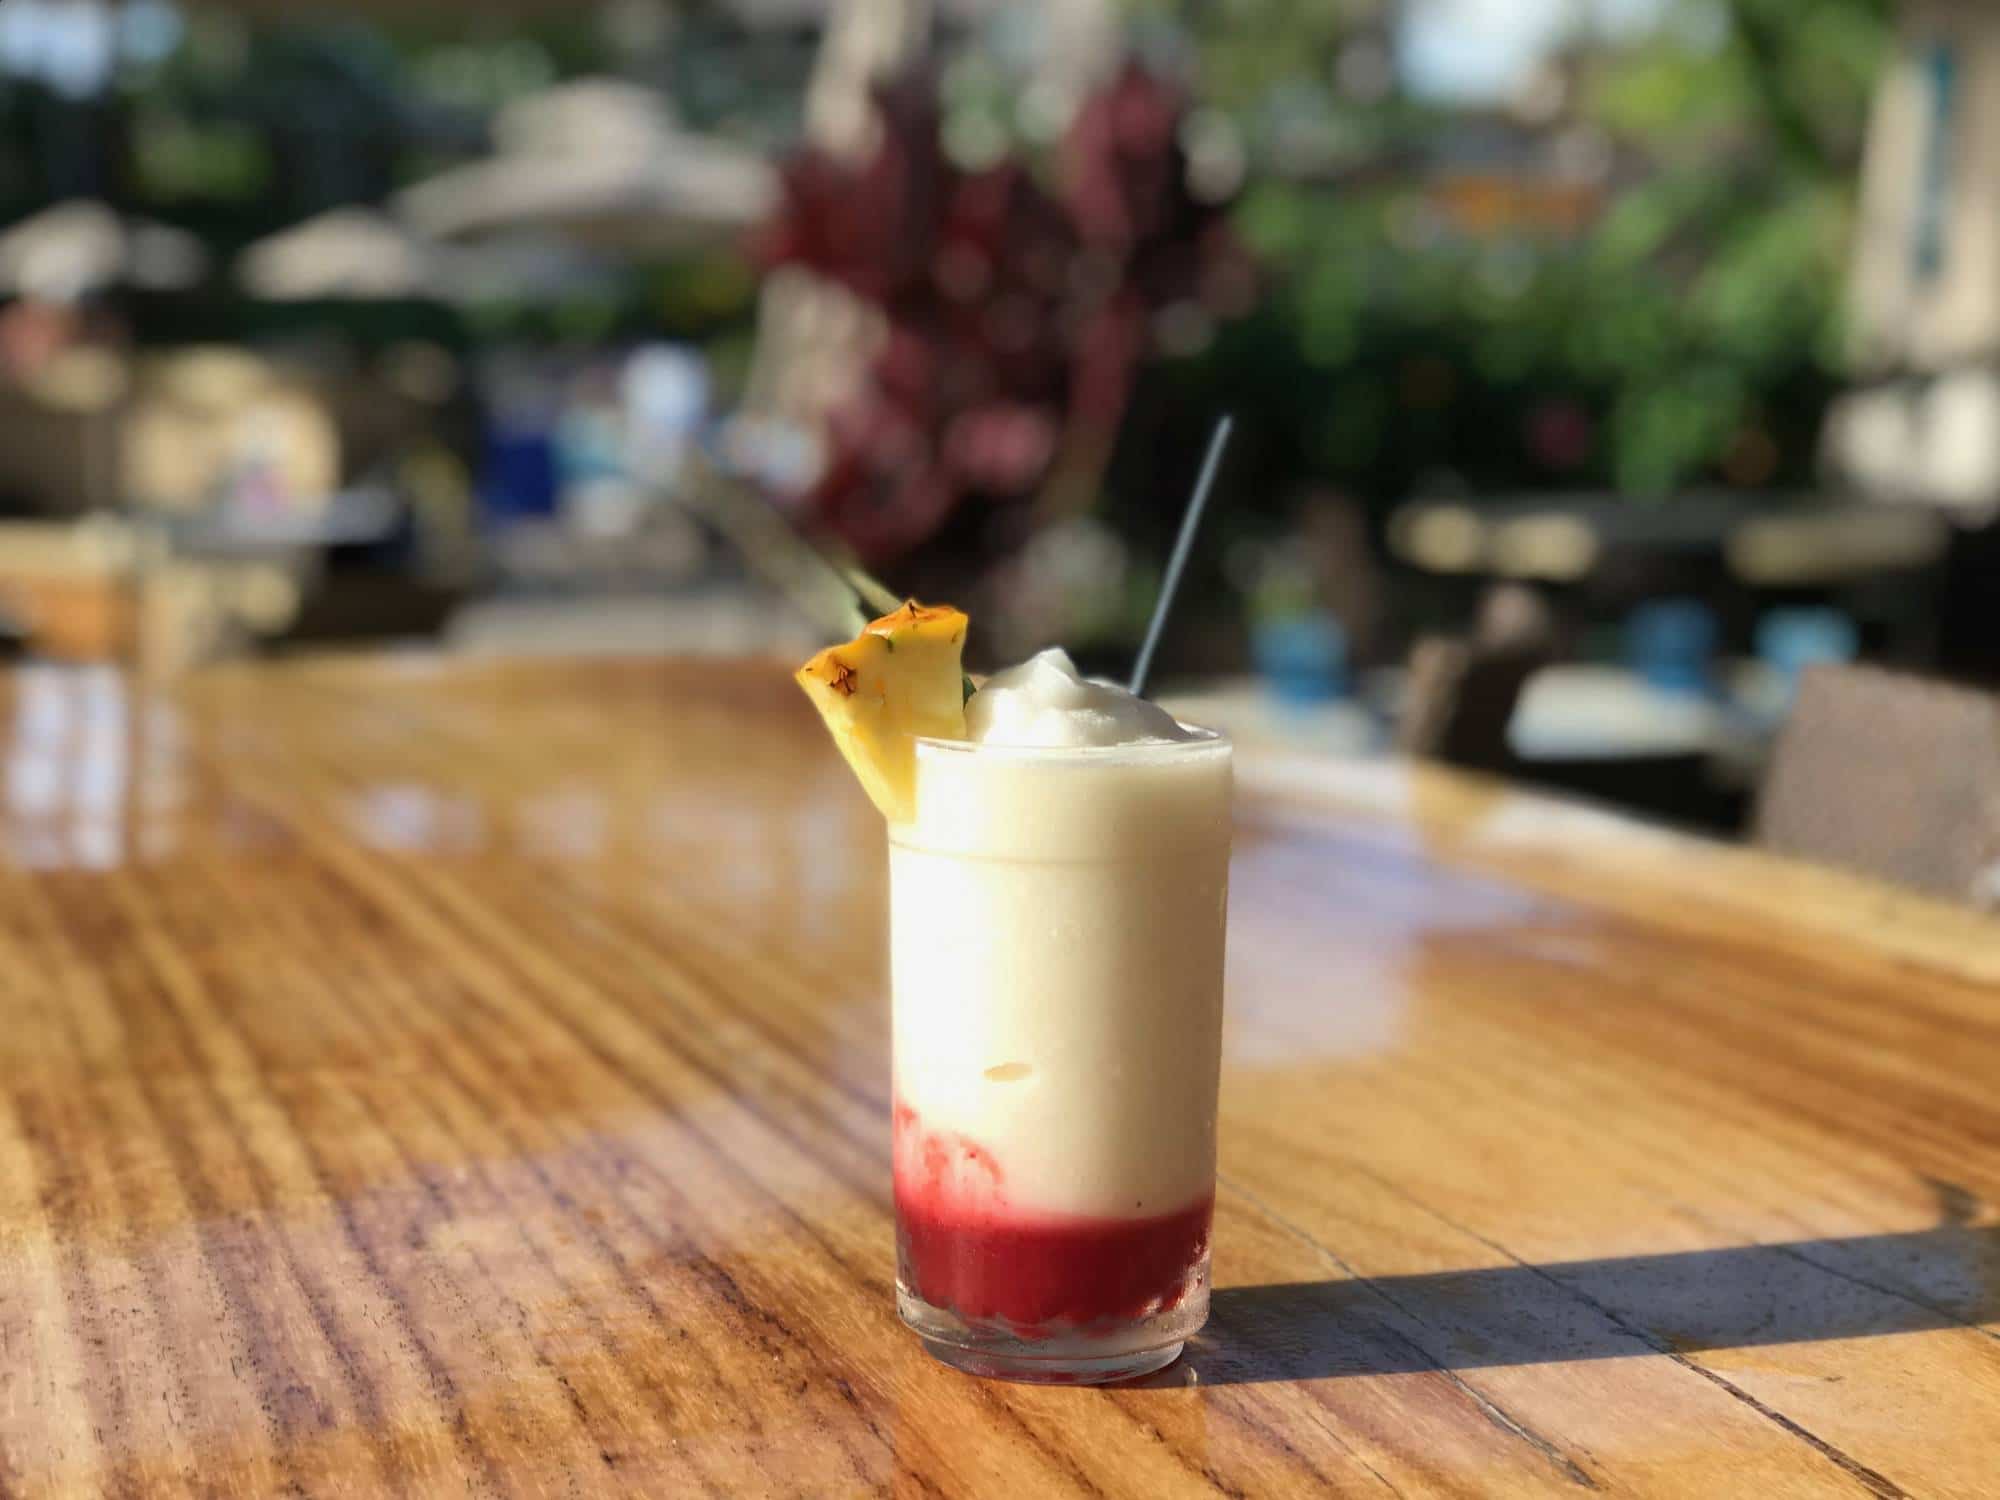 Lava flow cocktail with cream of coconut from popular Hawaiian refreshments on a table.
